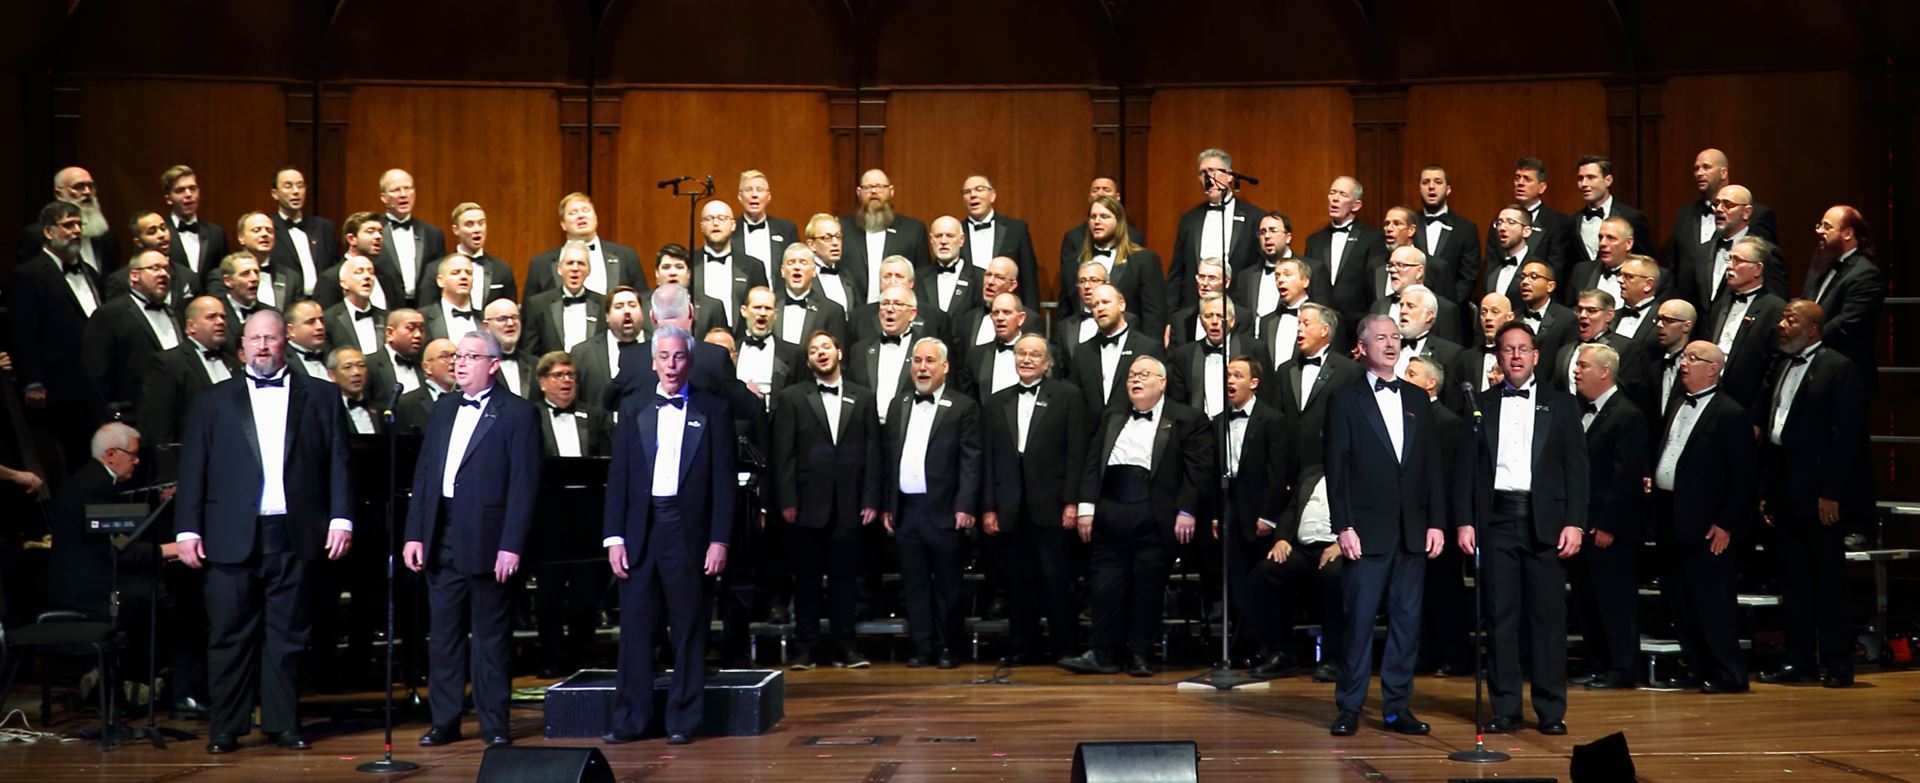 North Coast Men's Chorus on stage in tuxedoes